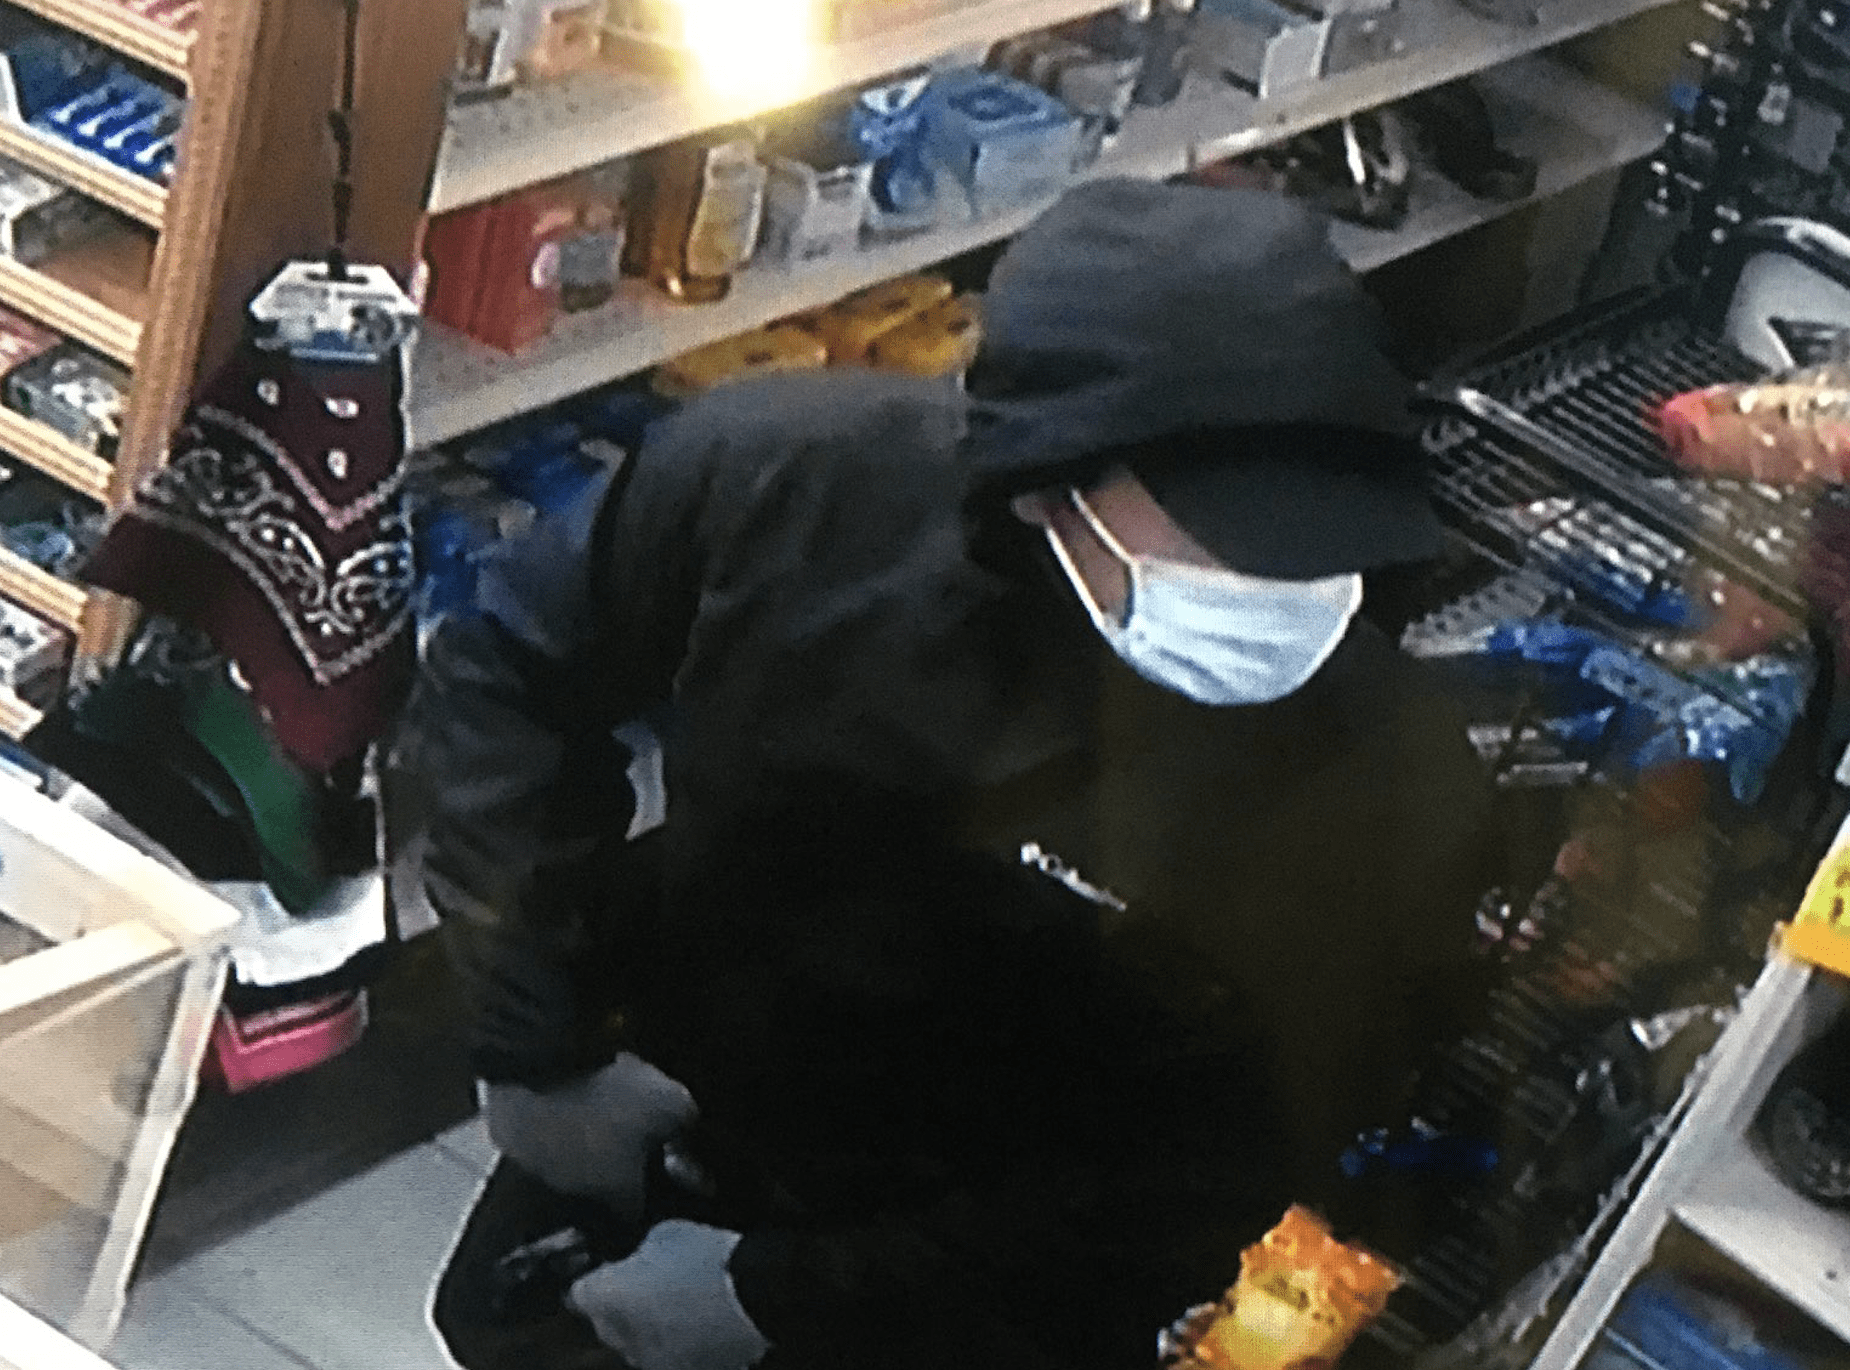 Suspect sought for alleged armed robbery in Buellton